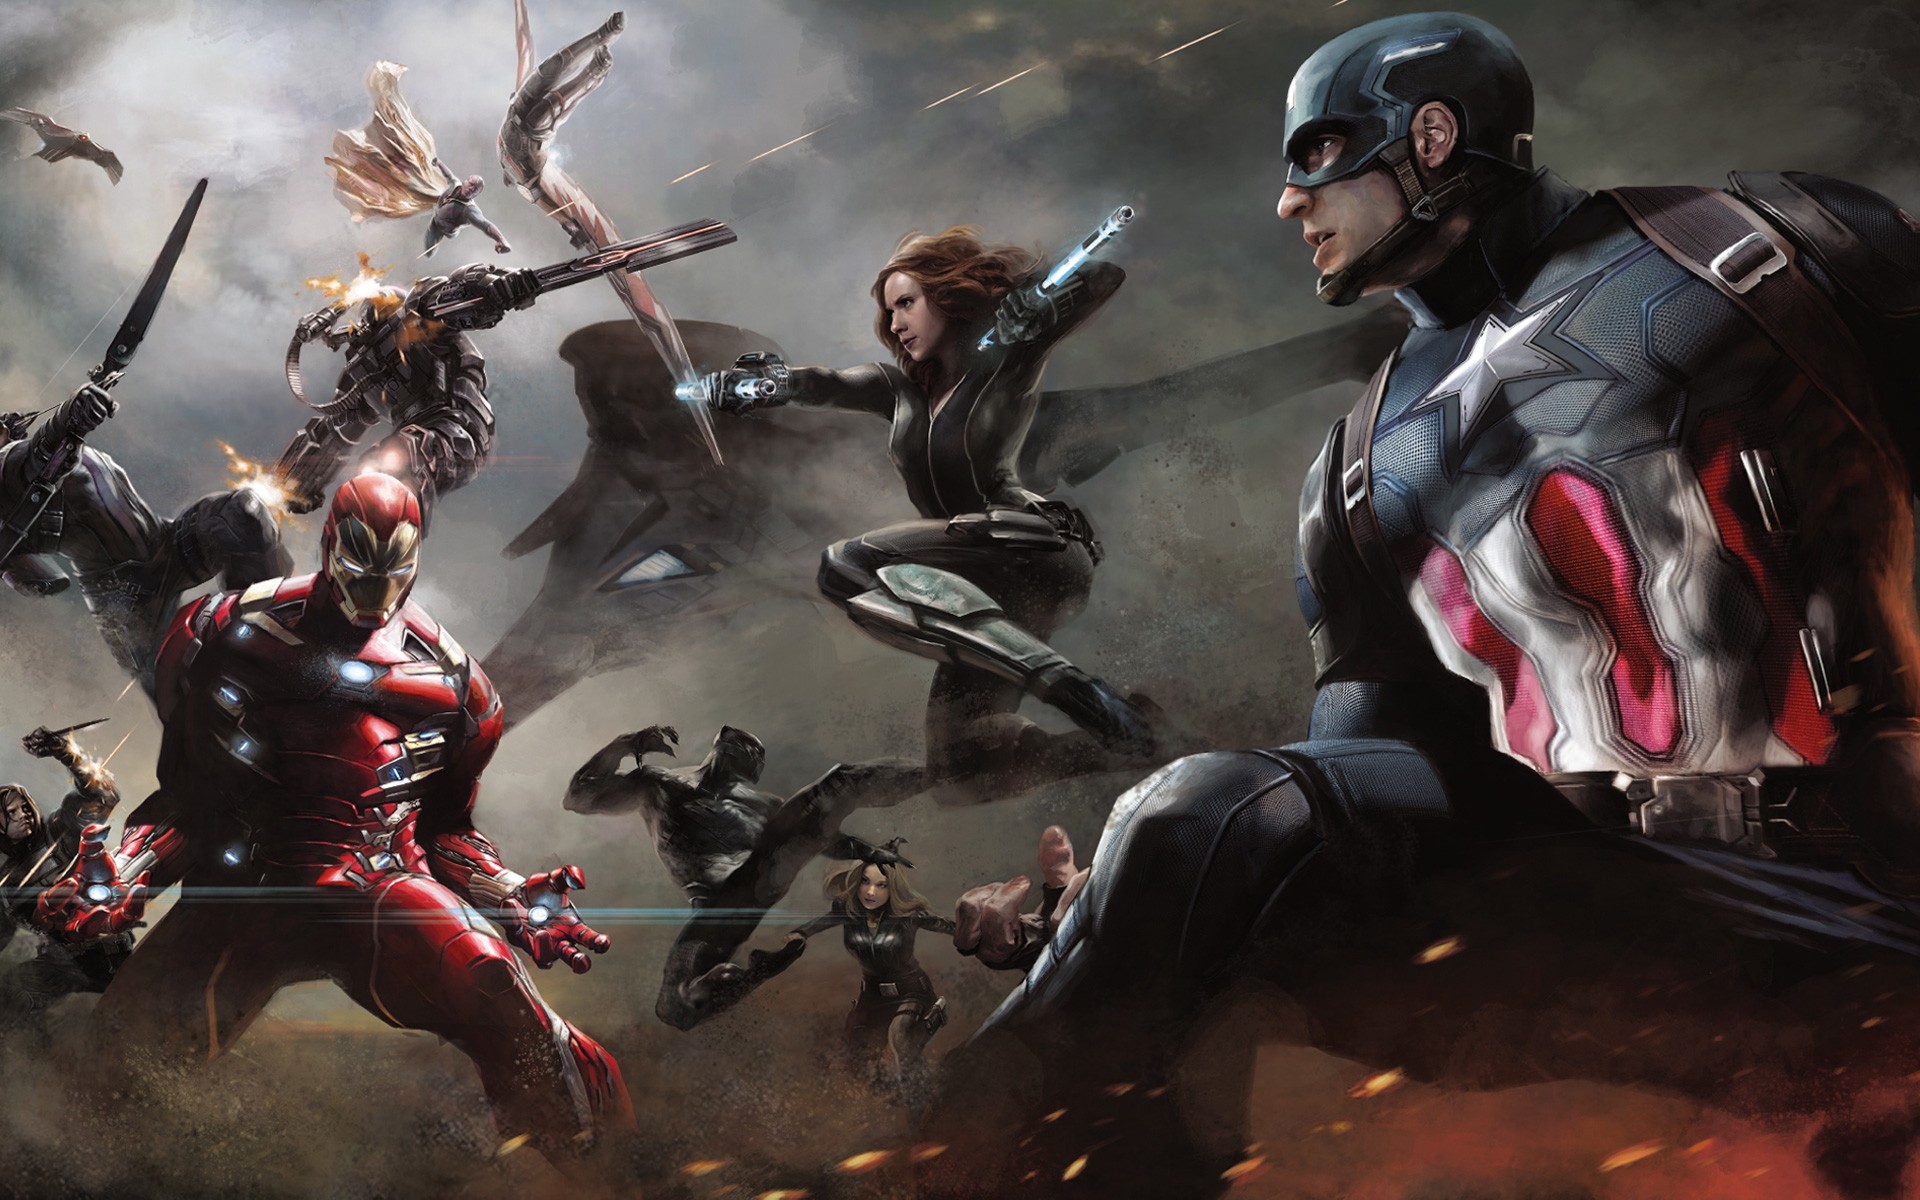 Civil War Wallpaper ① Download Free Awesome Full Hd Backgrounds